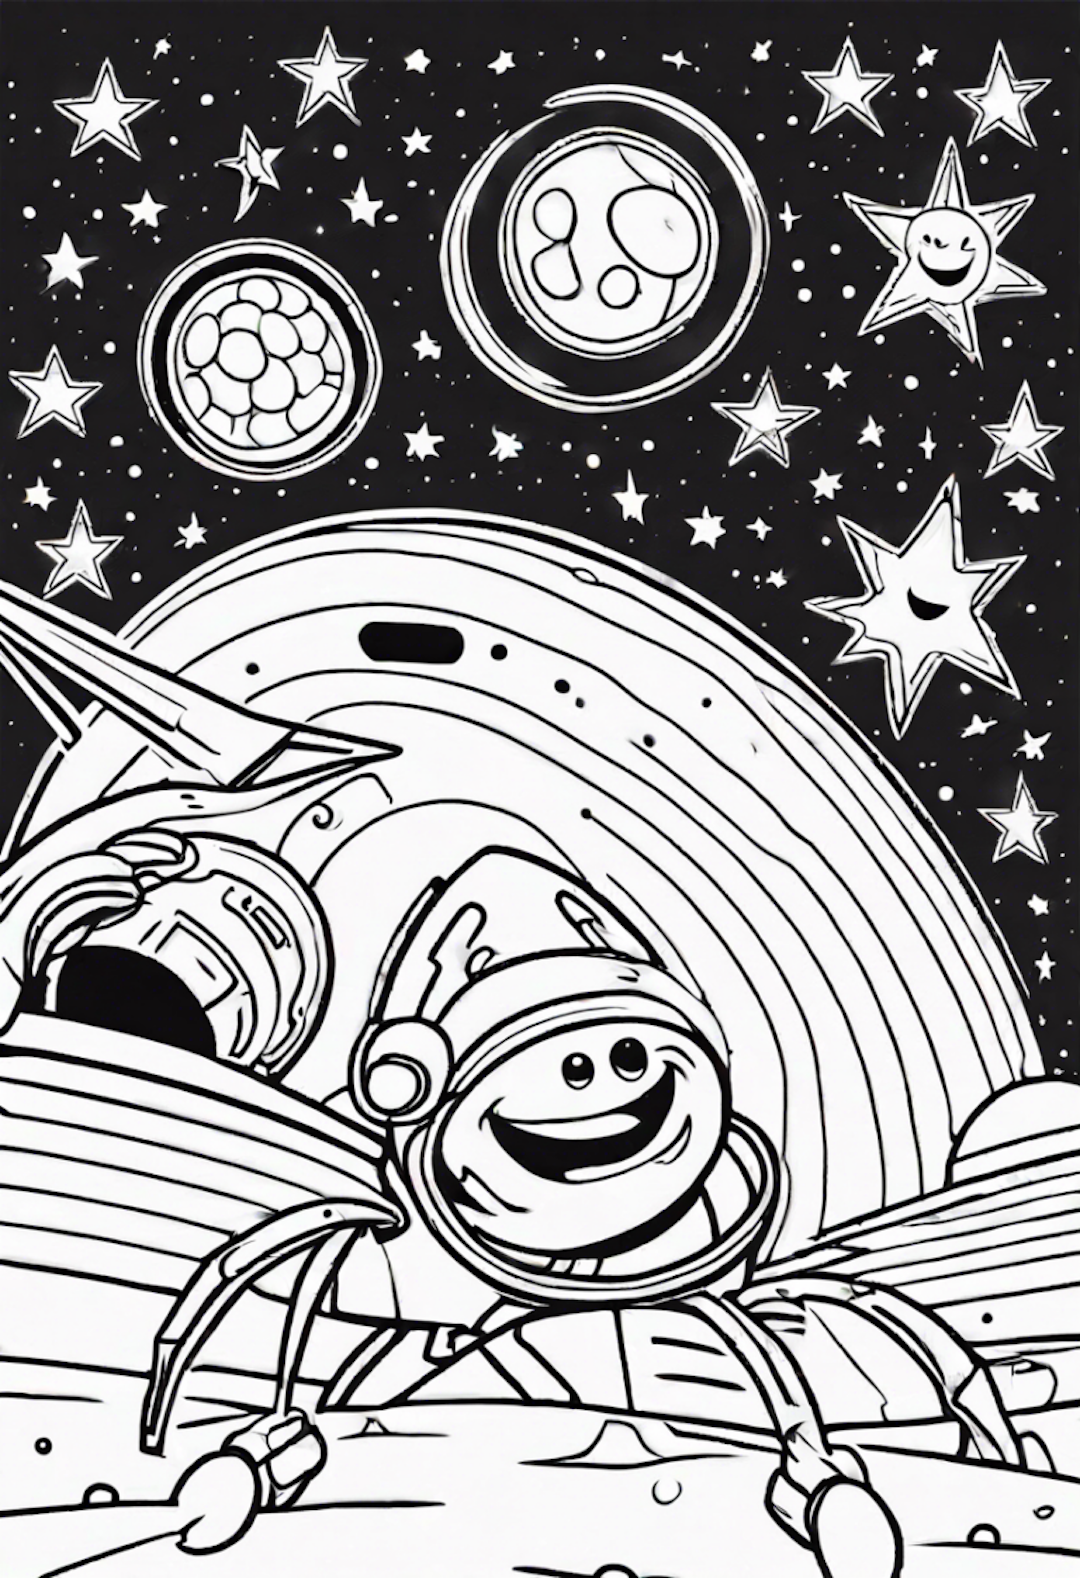 Happy Astronaut’s Space Adventure coloring pages